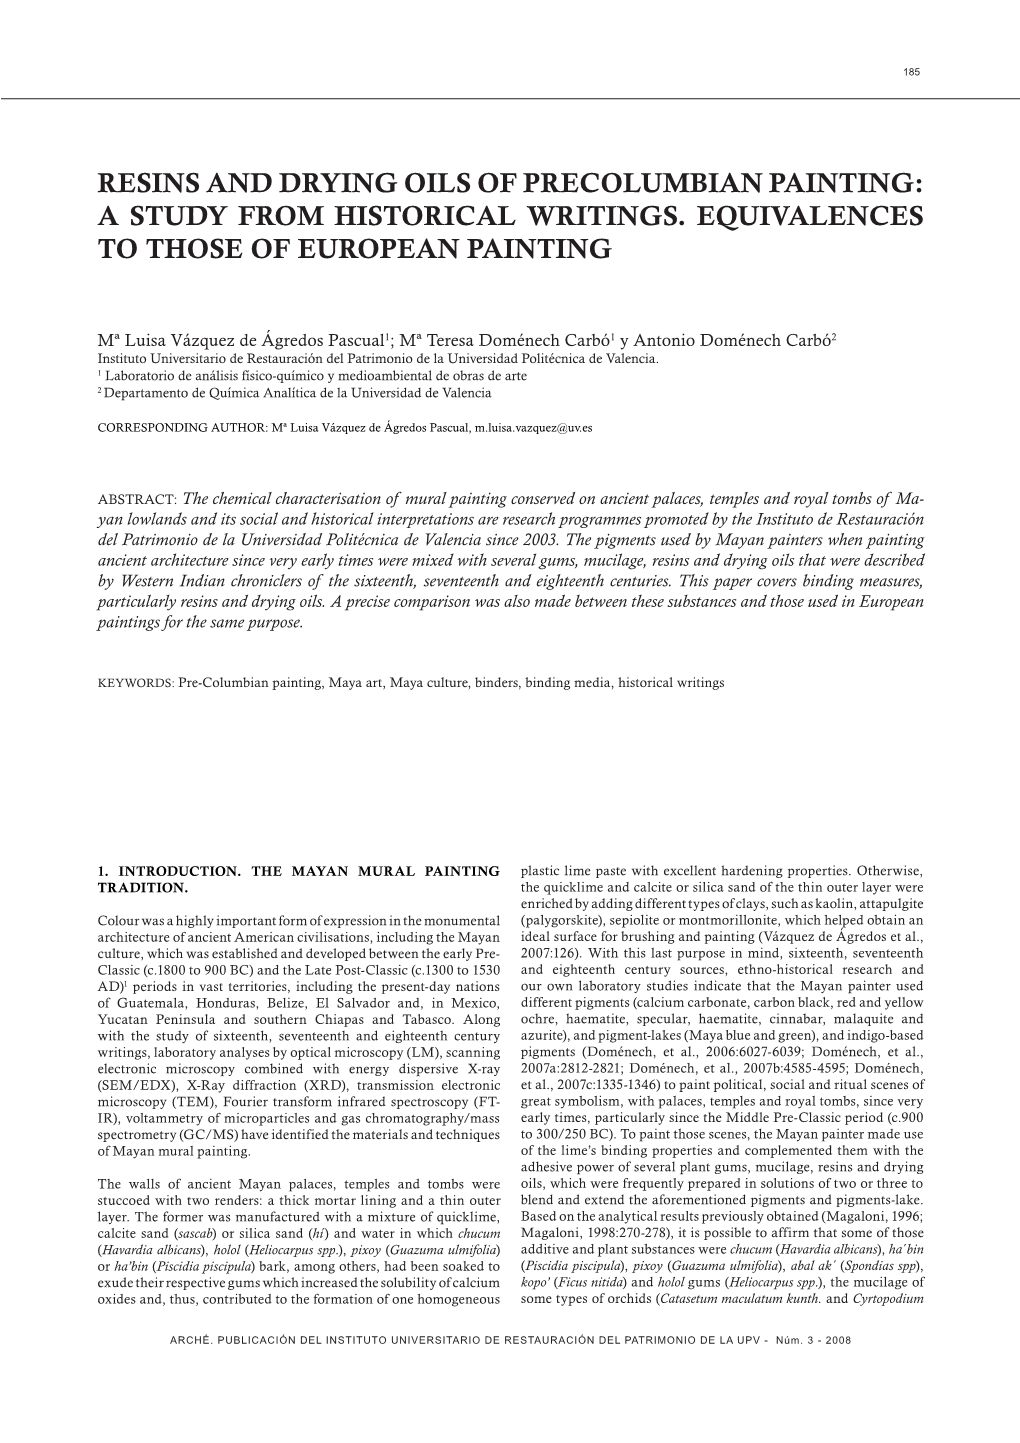 Resins and Drying Oils of Precolumbian Painting: a Study from Historical Writings. Equivalences to Those of European Painting